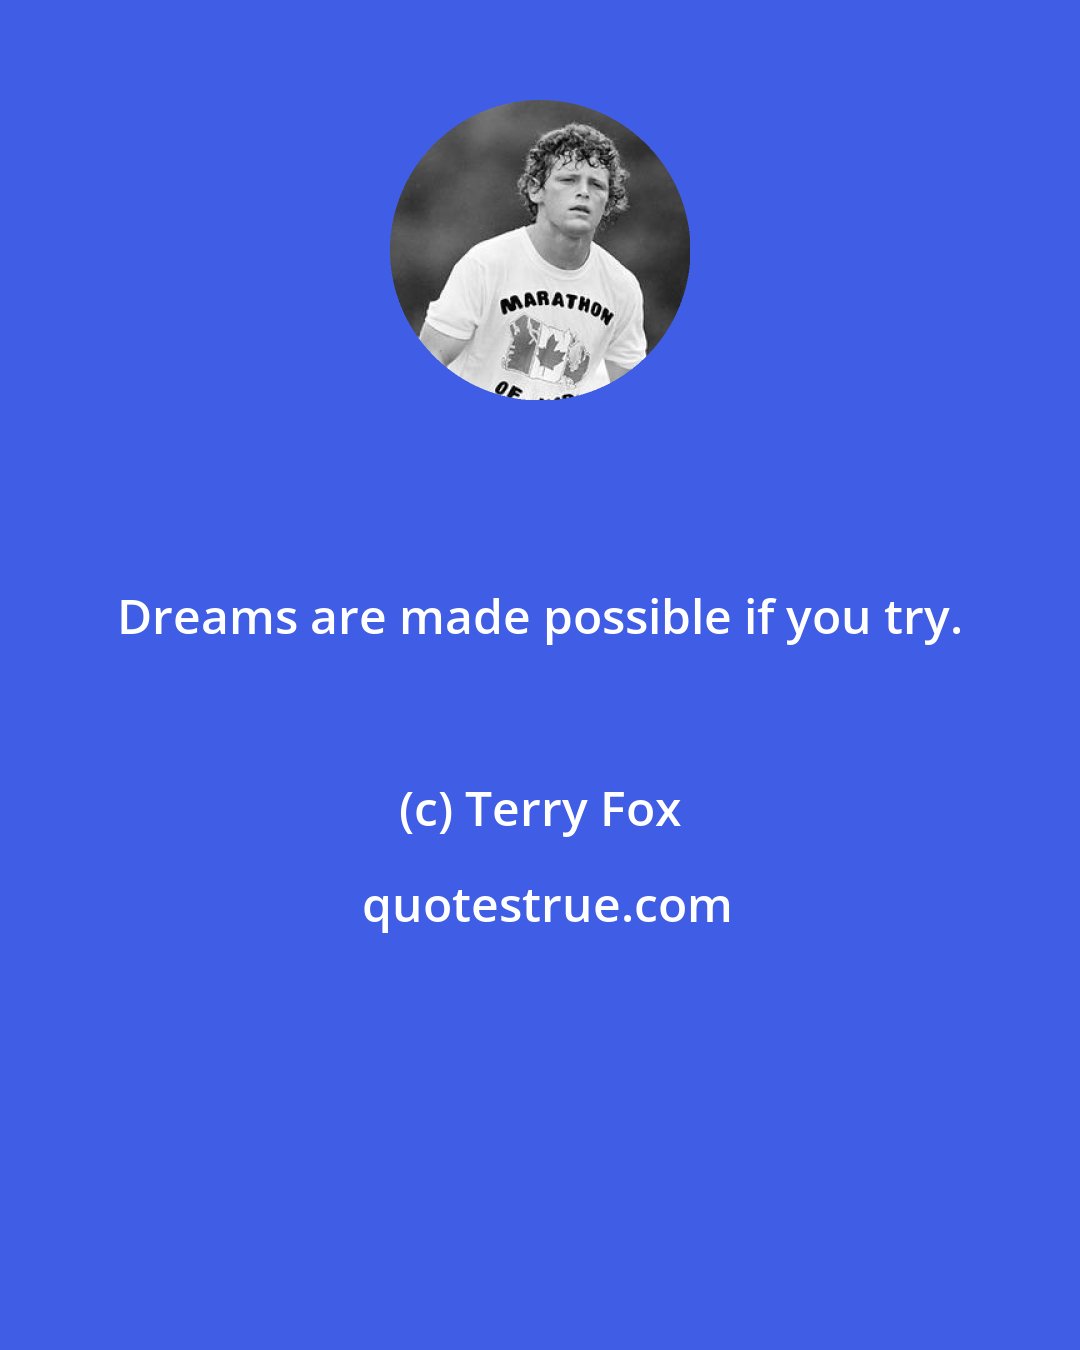 Terry Fox: Dreams are made possible if you try.